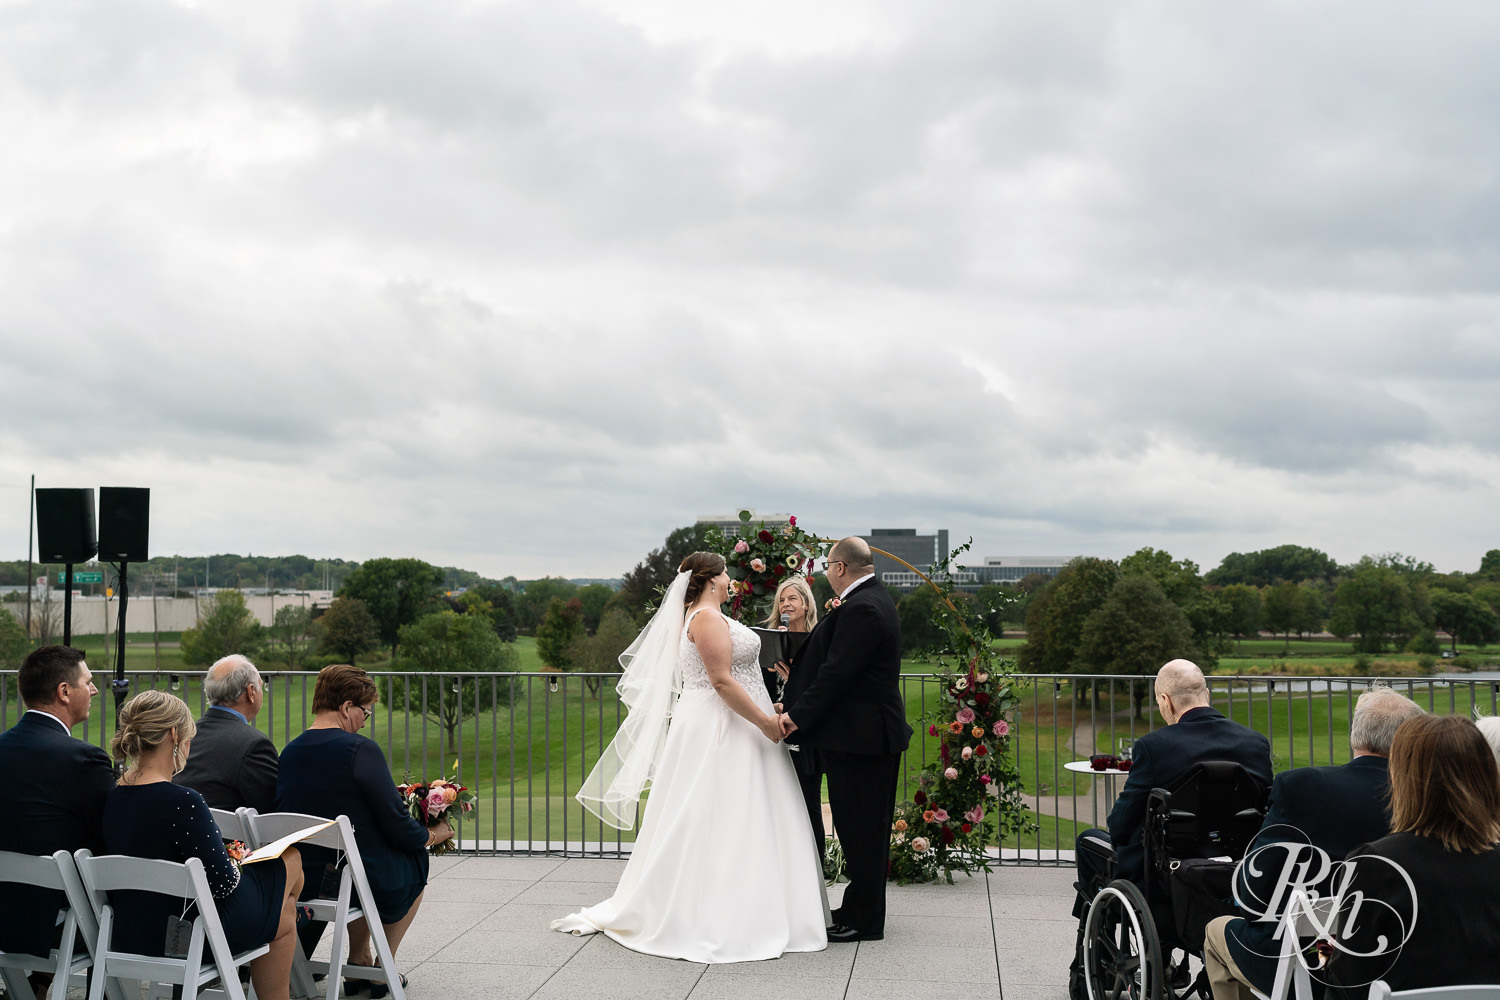 Wedding ceremony at Brookview Golf Course in Golden Valley, Minnesota.